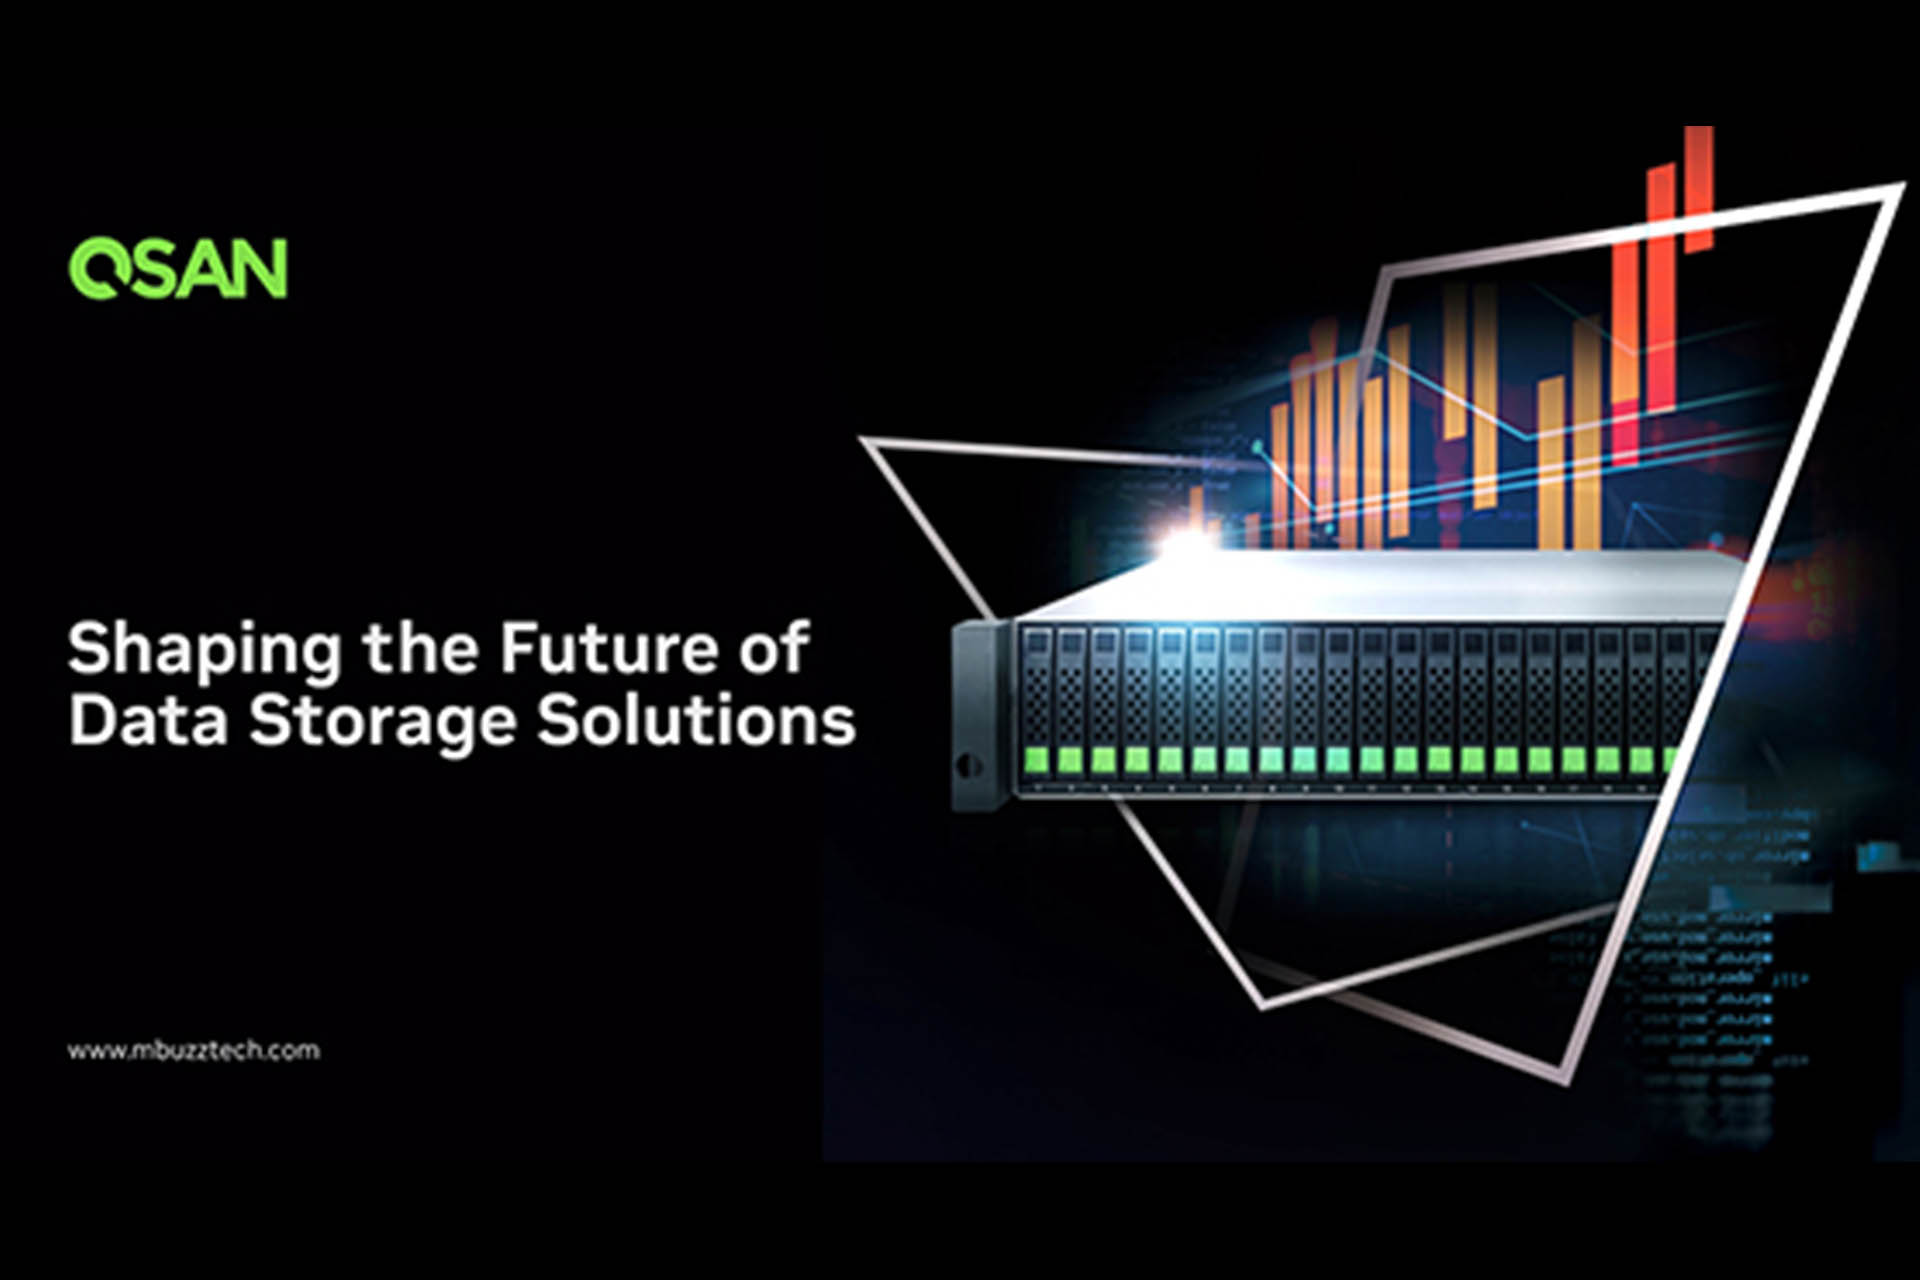 QSAN: Shaping the Future of Data Storage Solutions